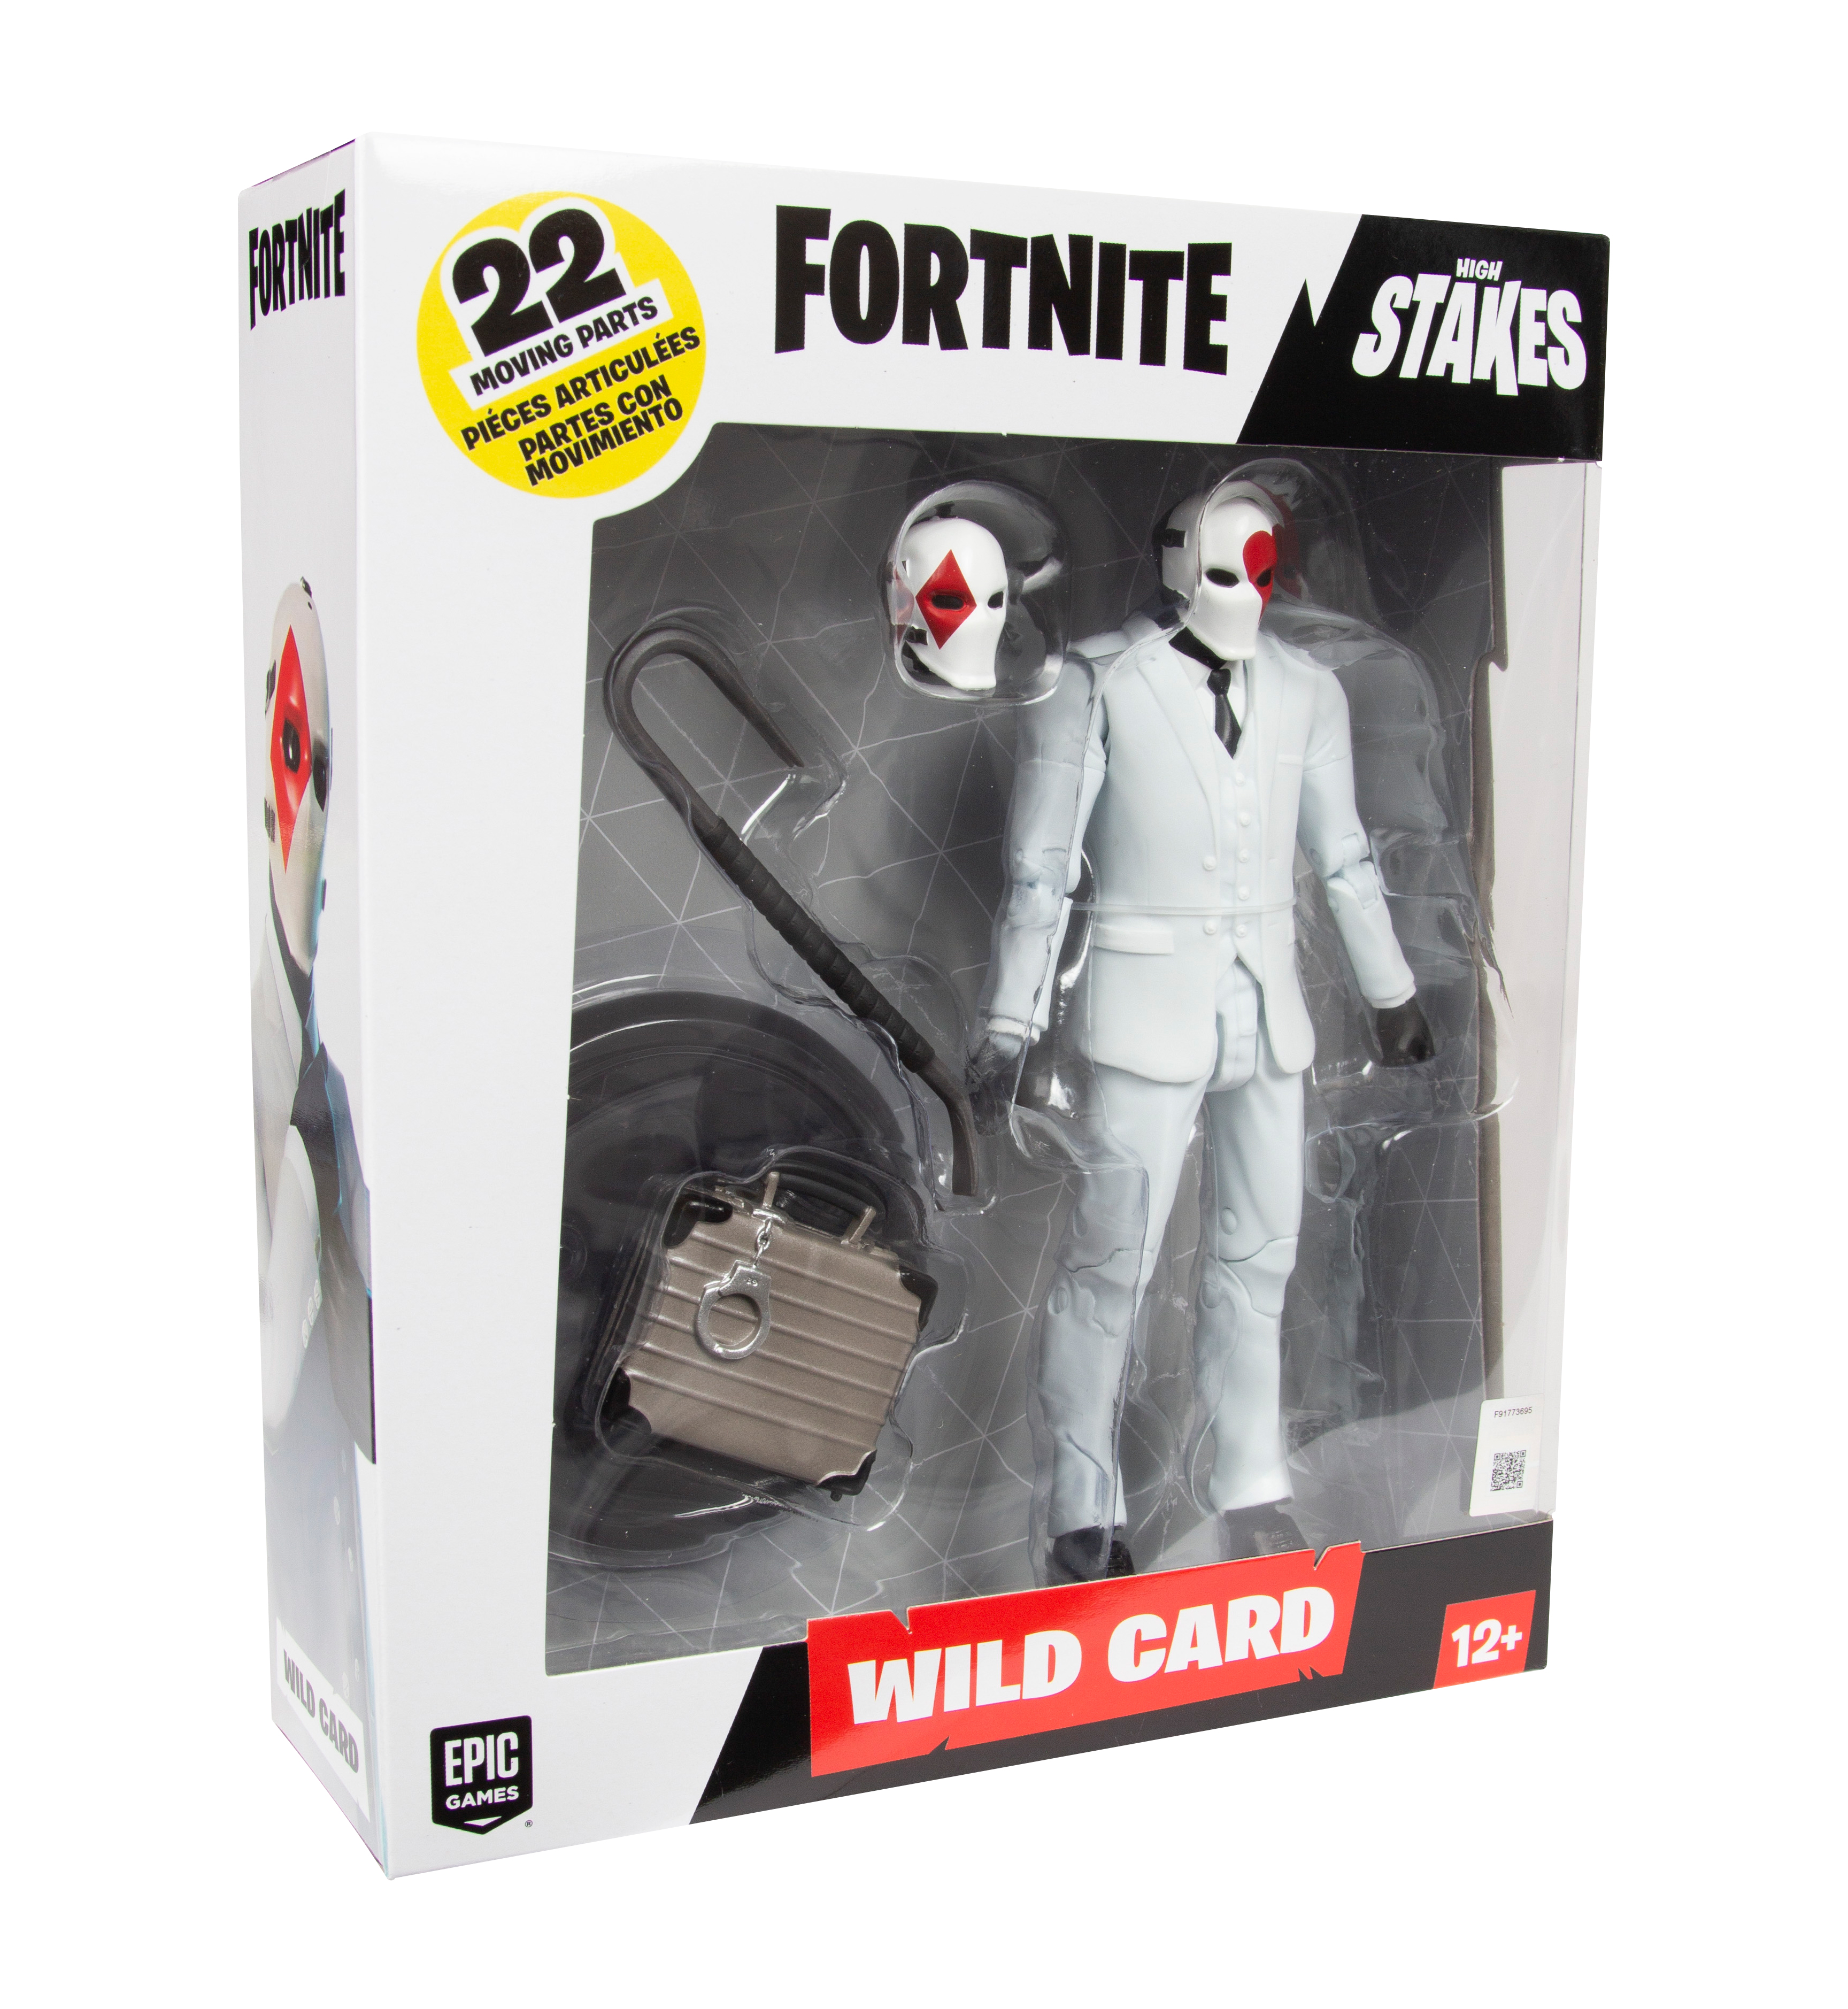 McFarlane Toys Fortnite High Stakes Wild Card 7 Inch Action Figure MISB for sale online 